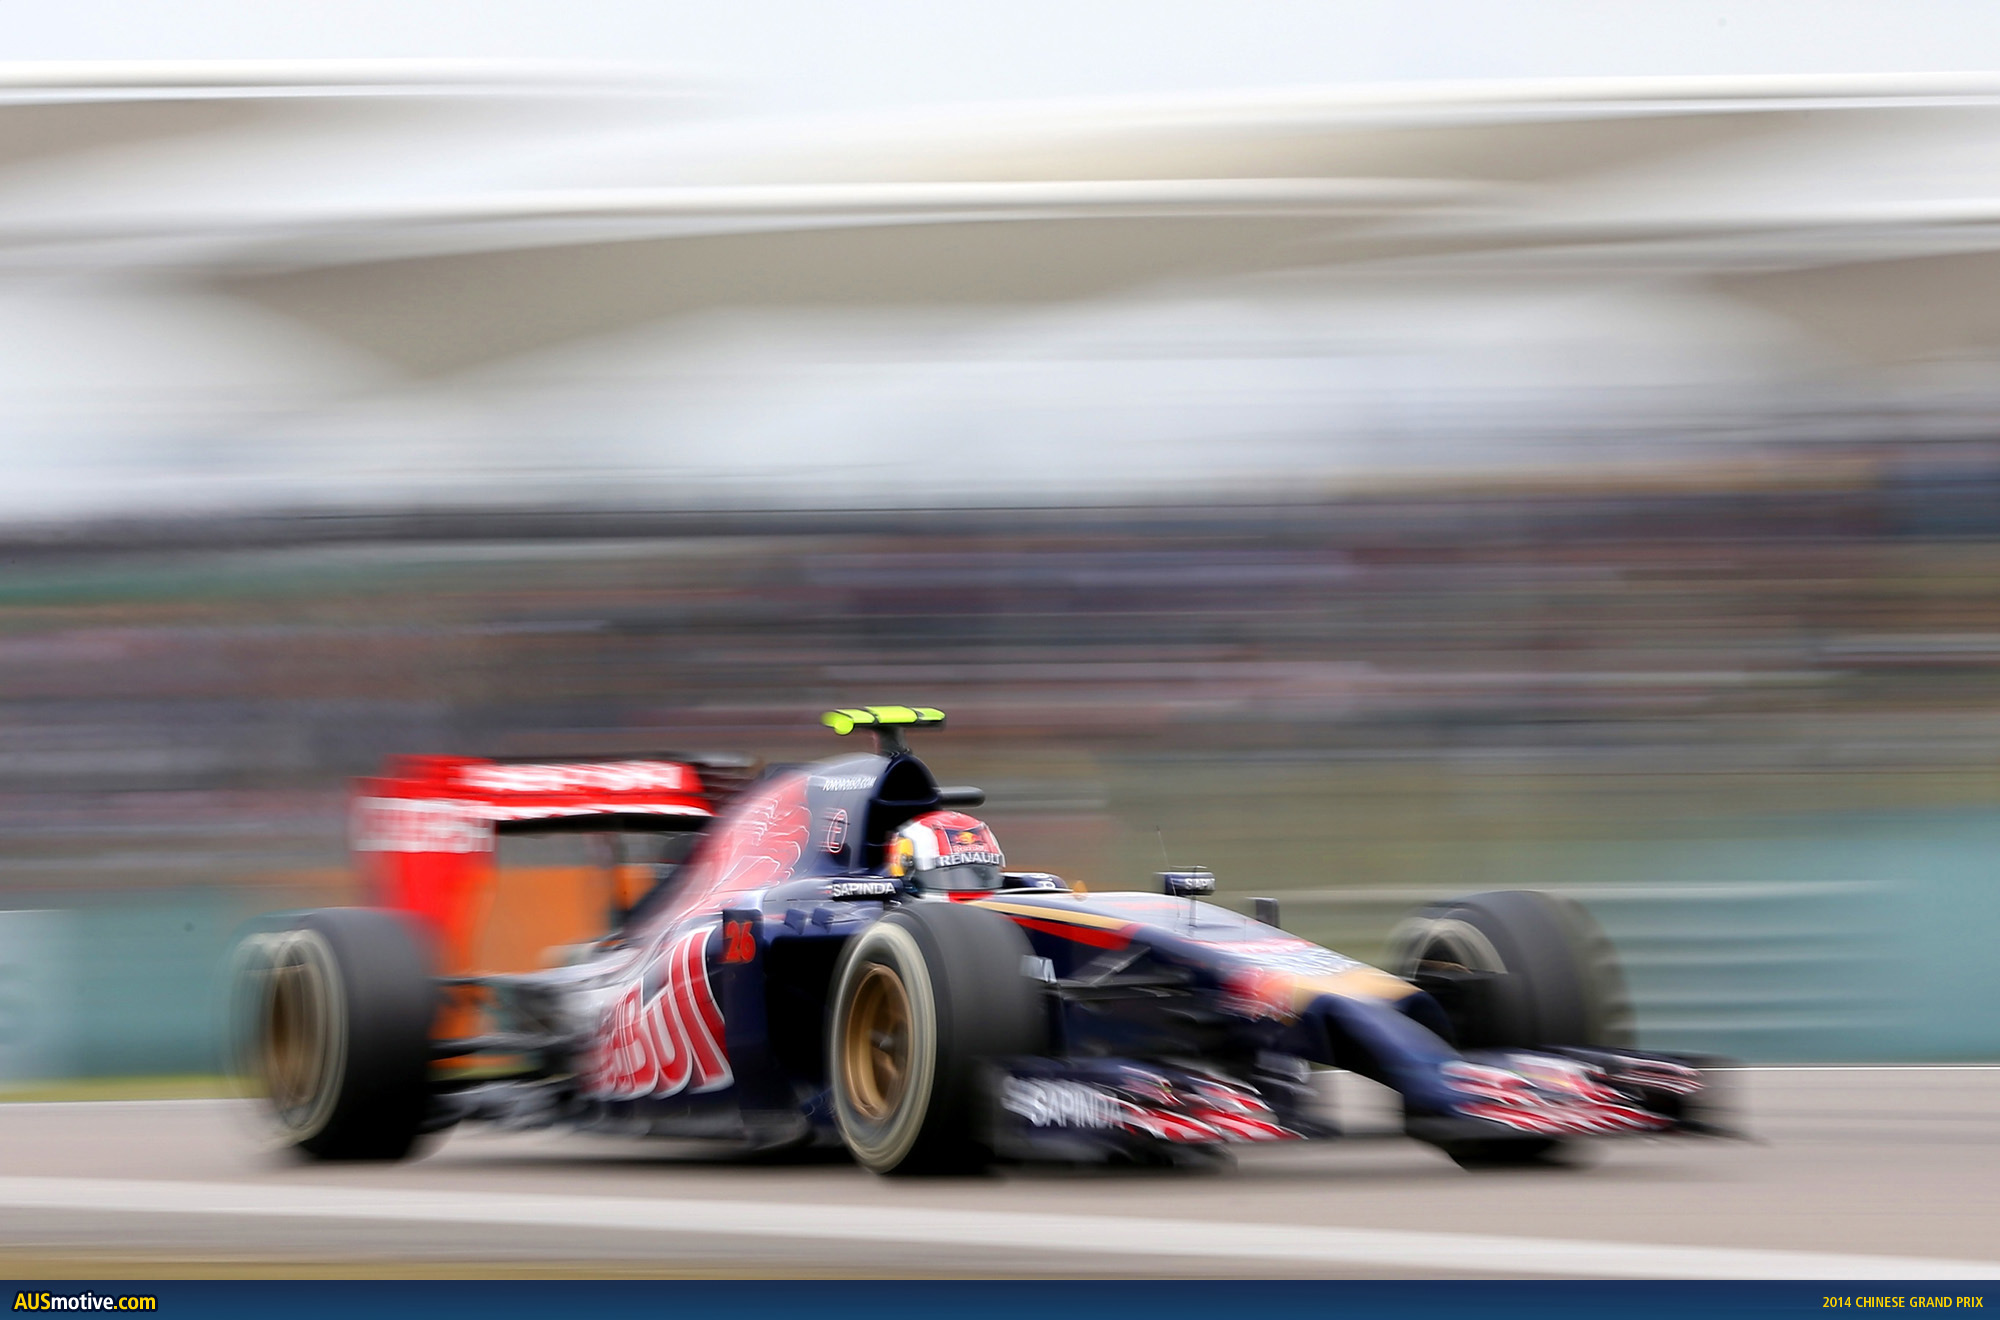 AUSmotive.com » 2014 Chinese Grand Prix in pictures